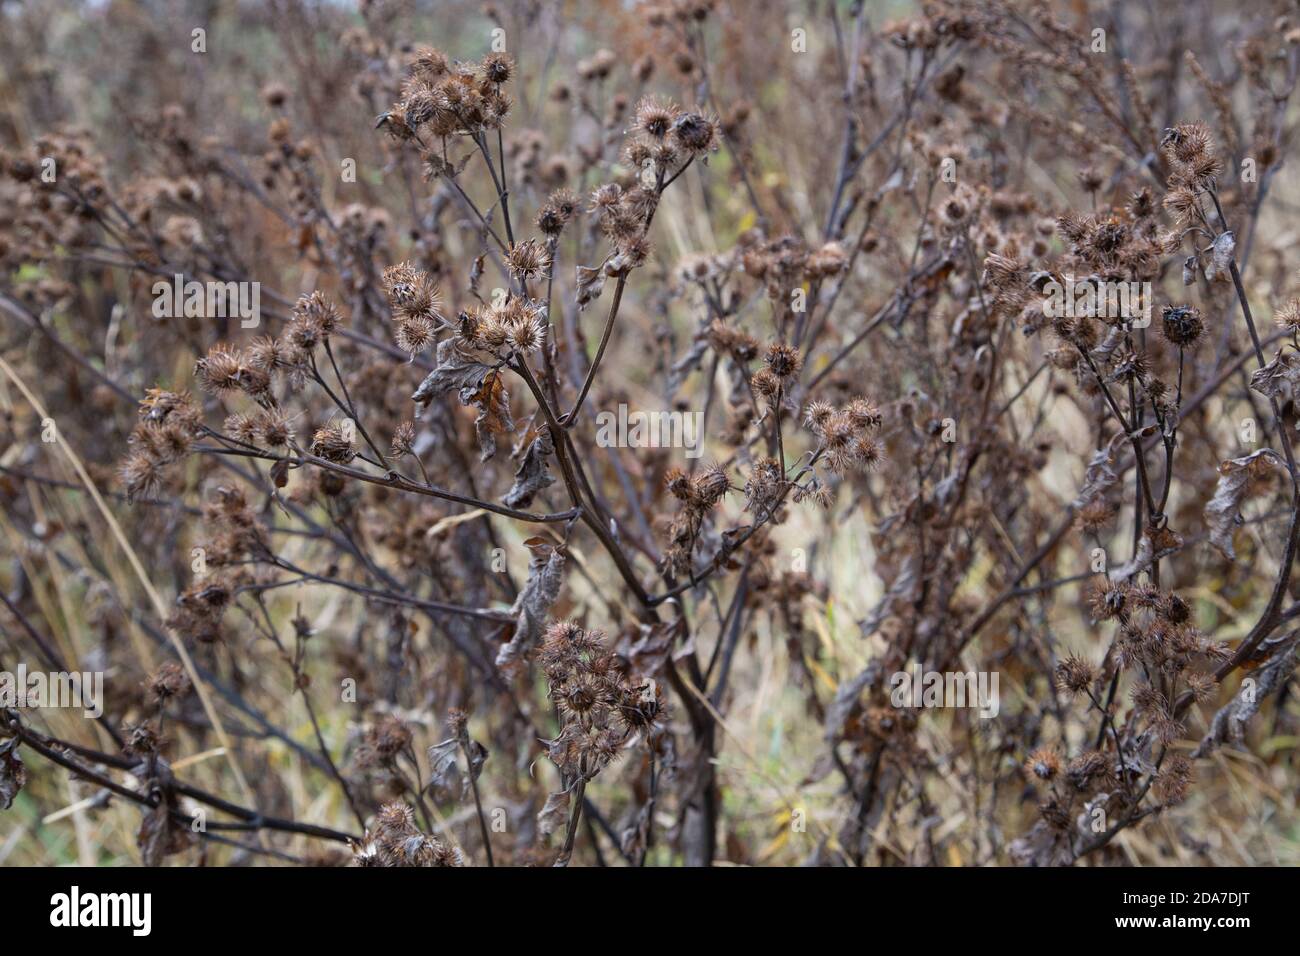 dry burdock thickets at daylight, close-up with selective focus Stock Photo